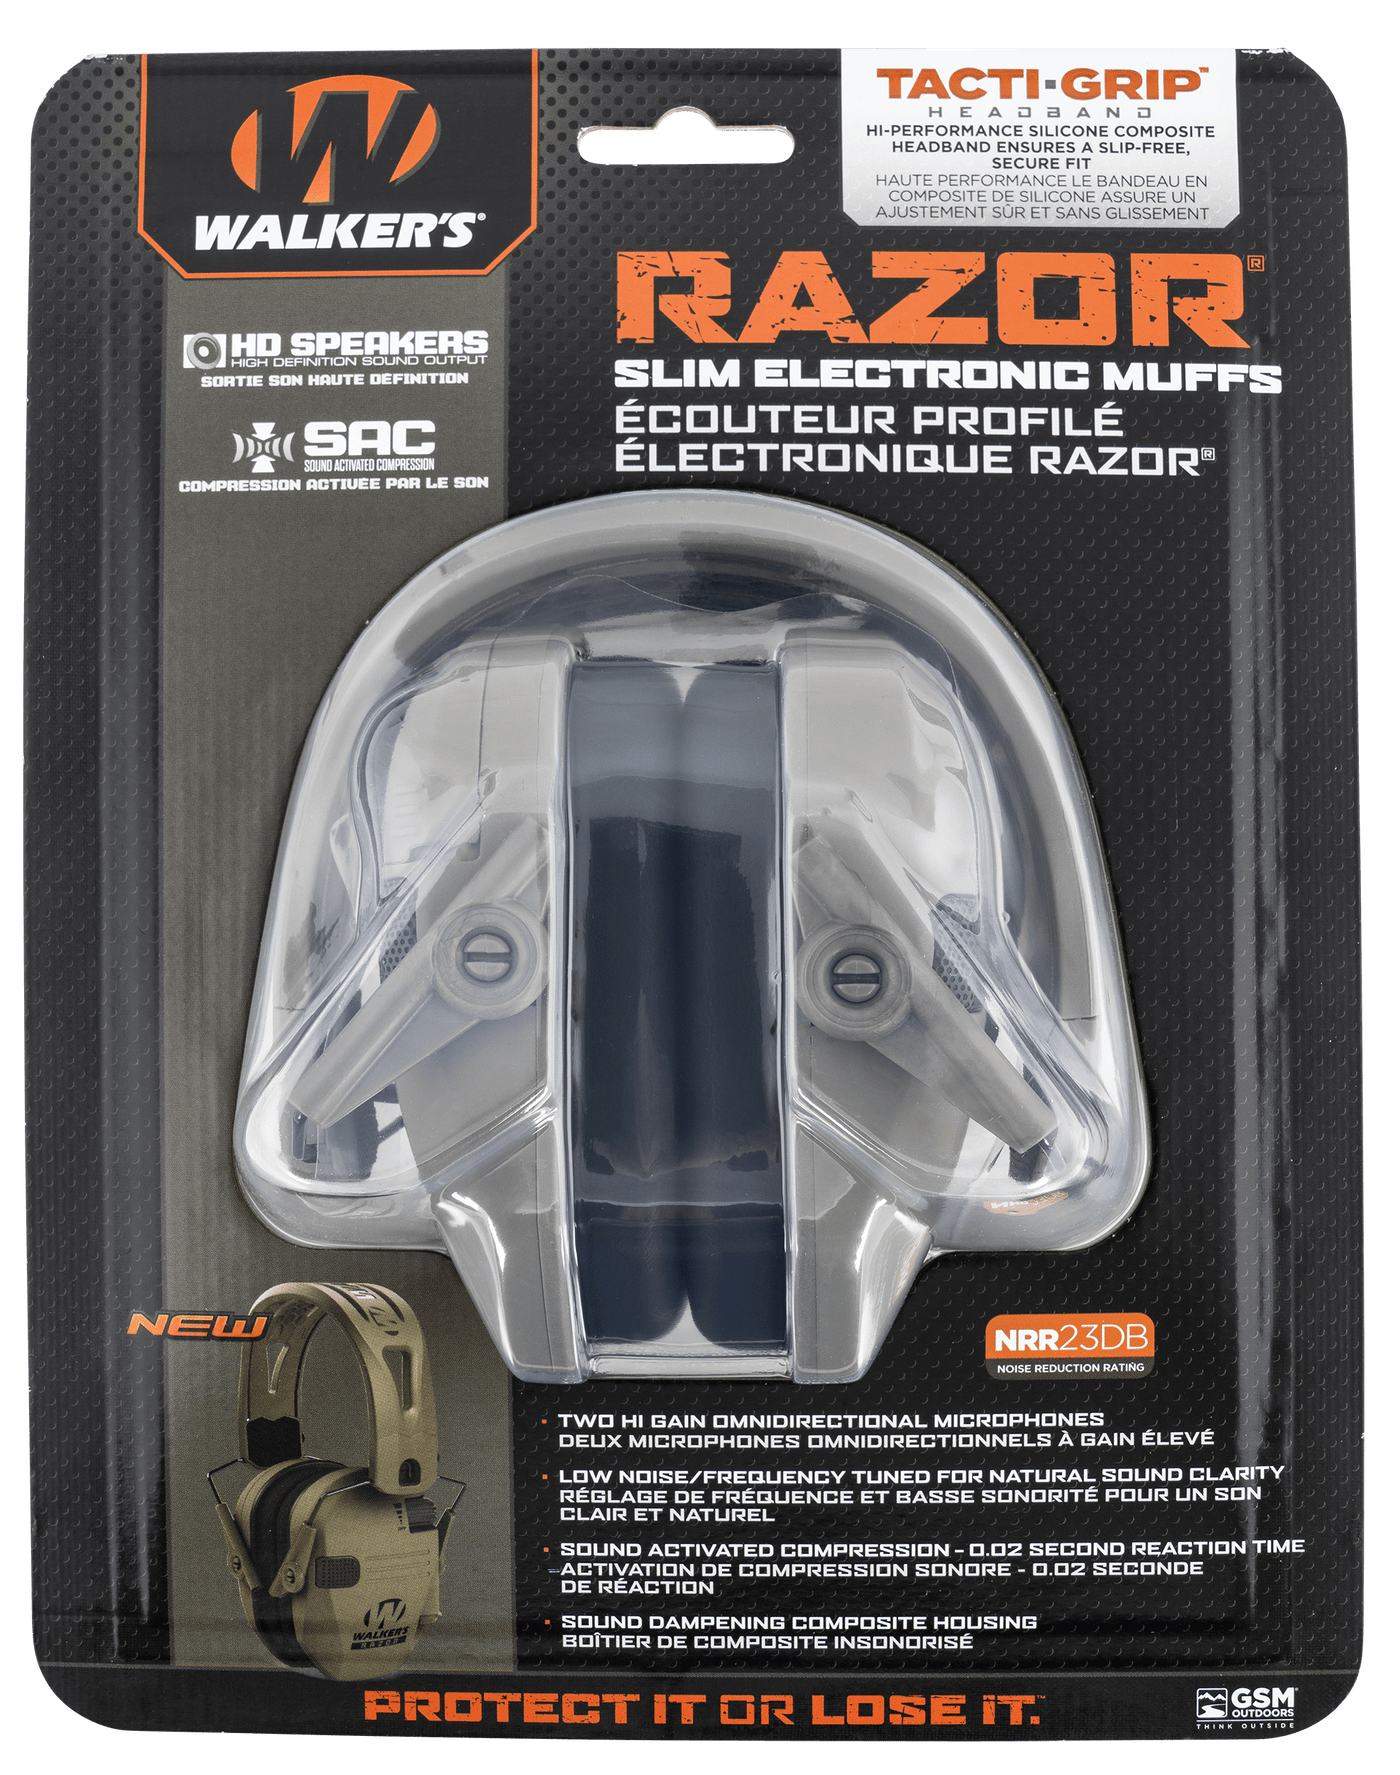 Walker's Walker's Tacti Grip Rzr Fde Hband Safety/Protection